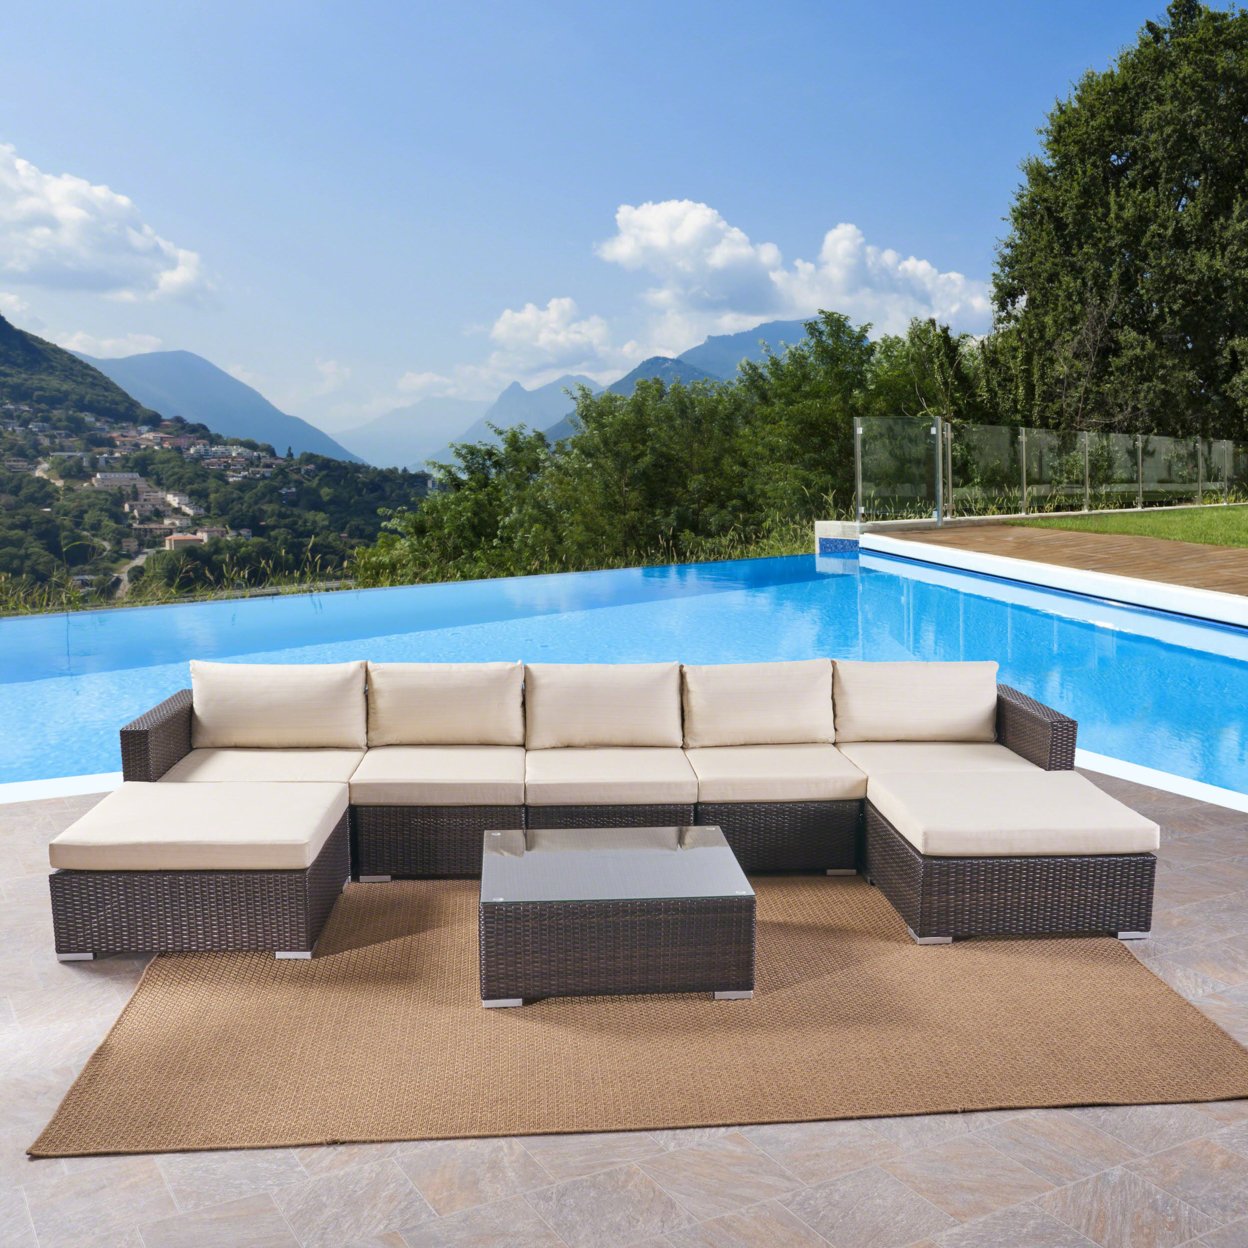 Tom Rosa Outdoor 5 Seater Wicker Sectional Sofa Set With Cushions - Brown Wicker